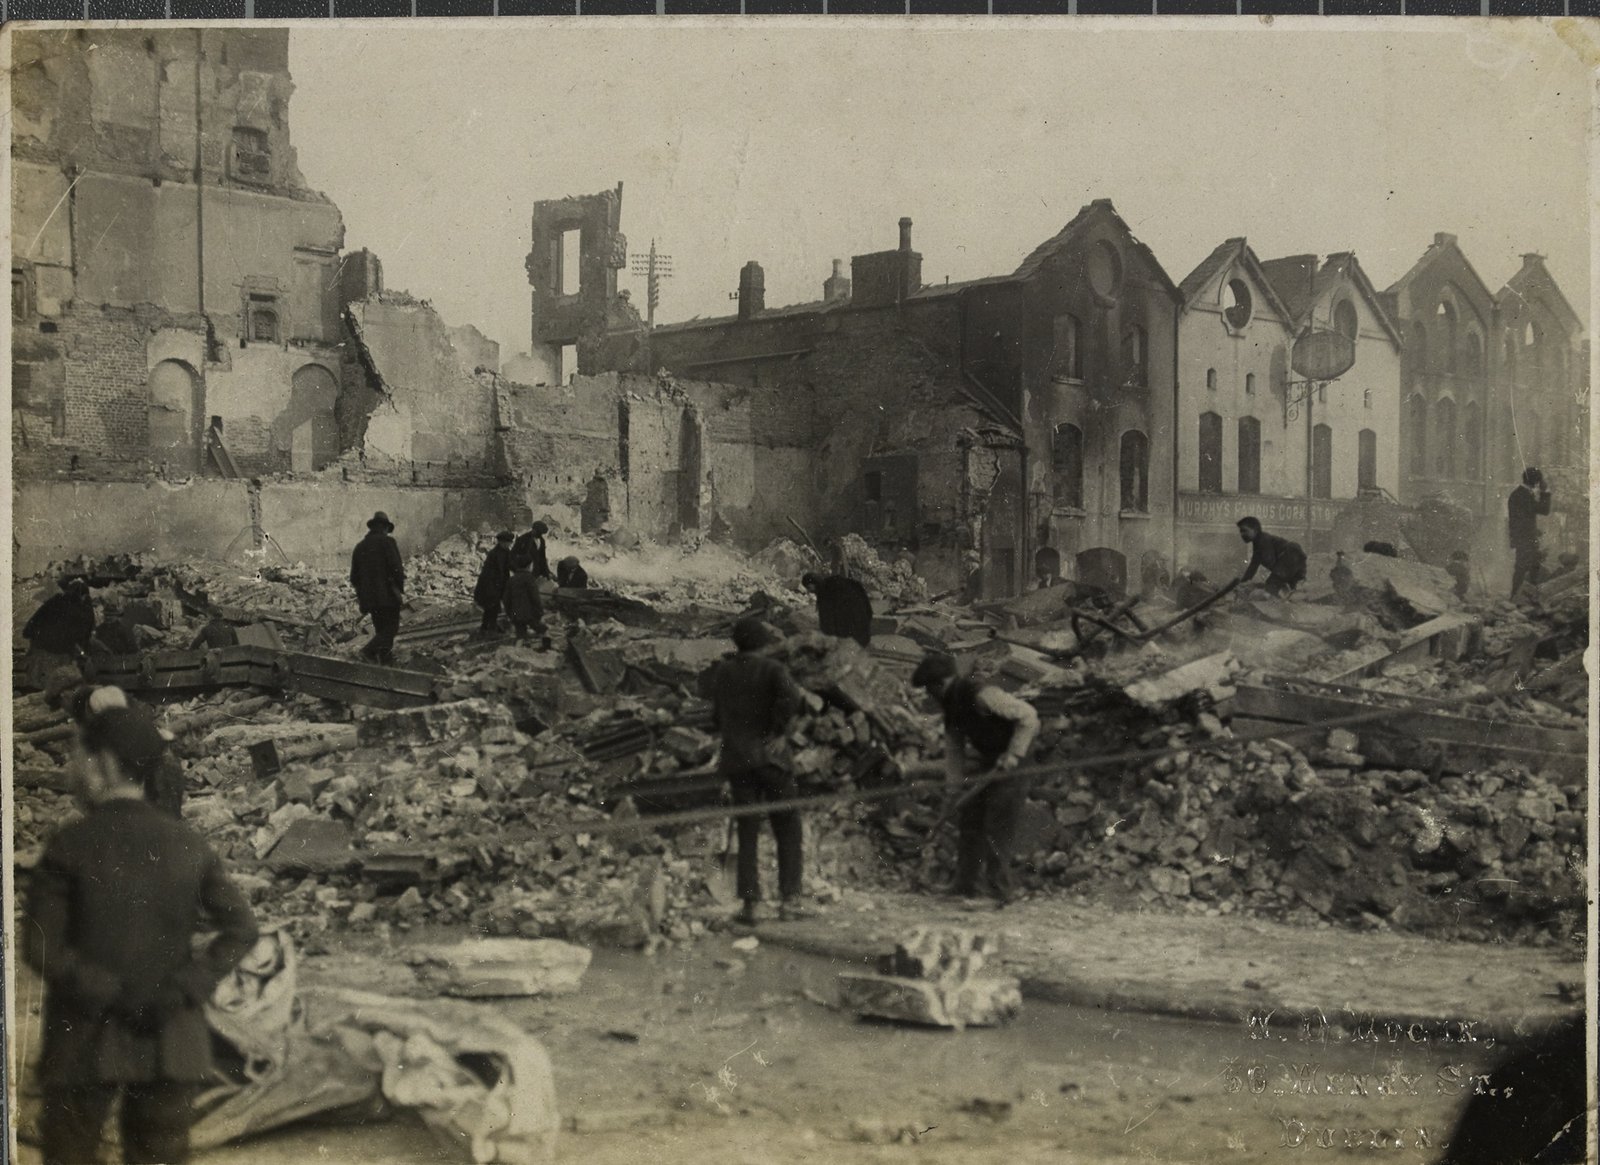 Image - The rubble of Cash's department store on Patrick Street after the burning of the city. Image courtesy of the National Library of Ireland